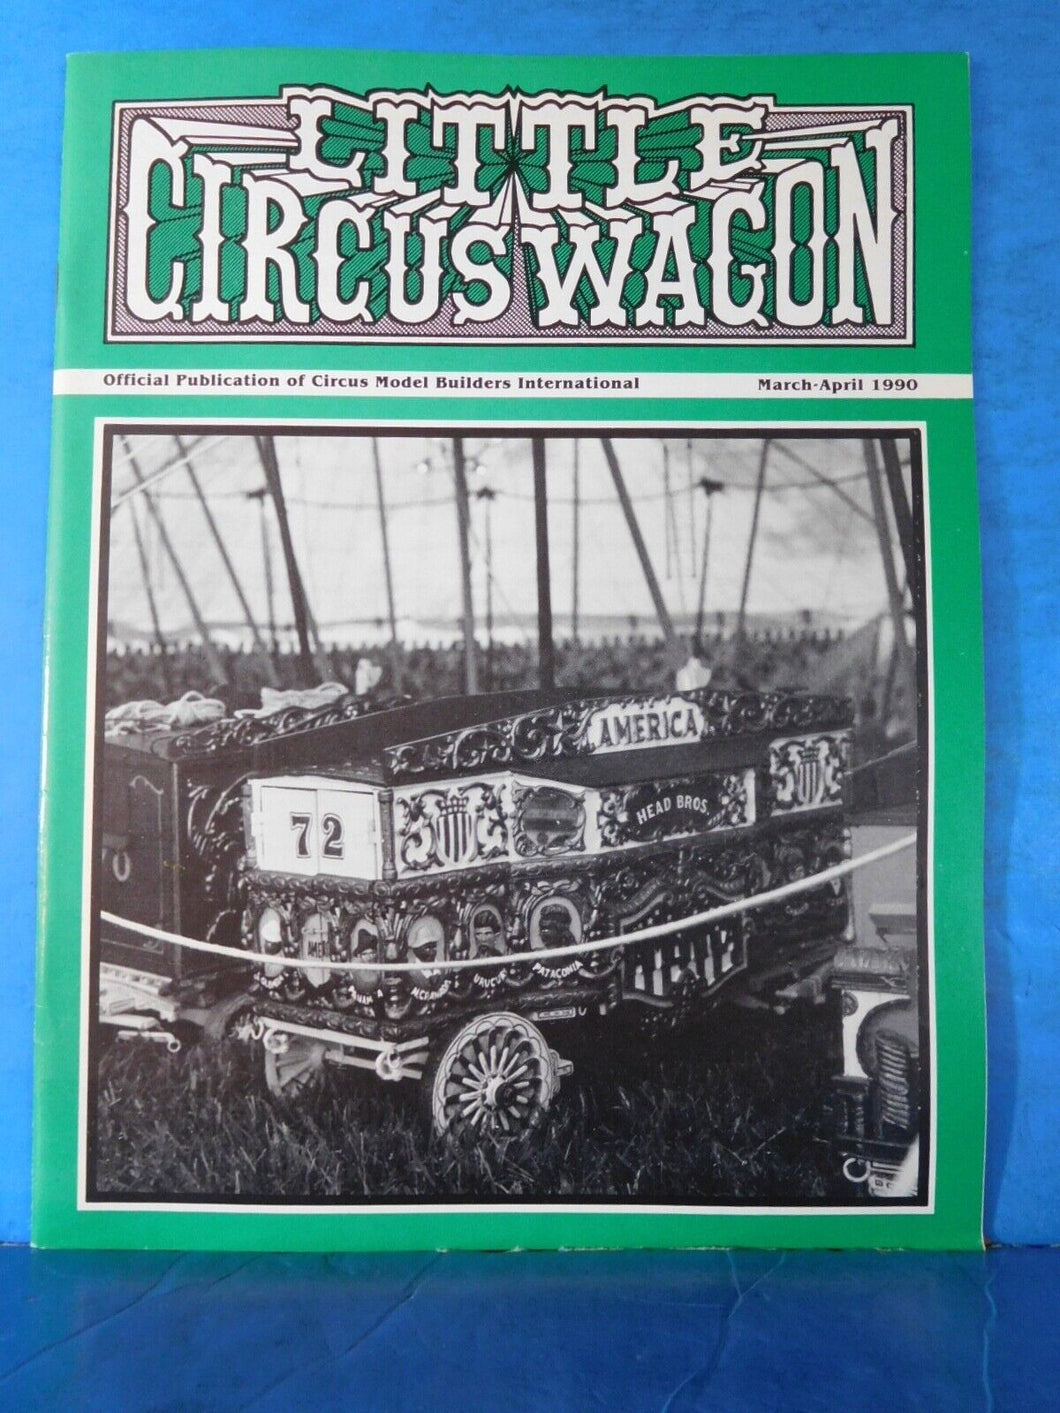 Little Circus Wagon 1990 March April Circus Model Builders International